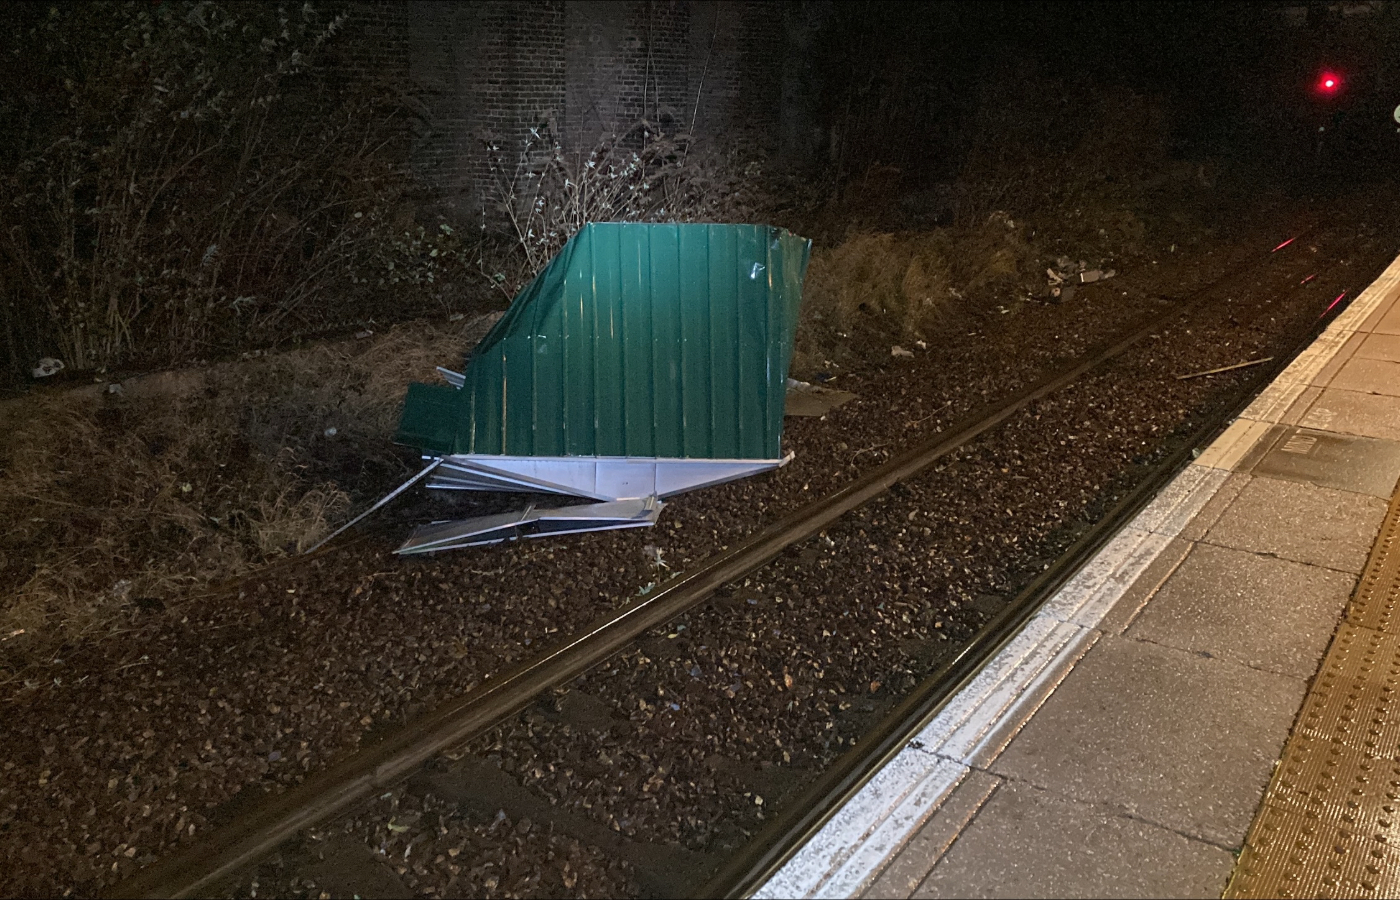 A garden shed made its way on to the railway line at Bellgrove. Photo: Network Rail